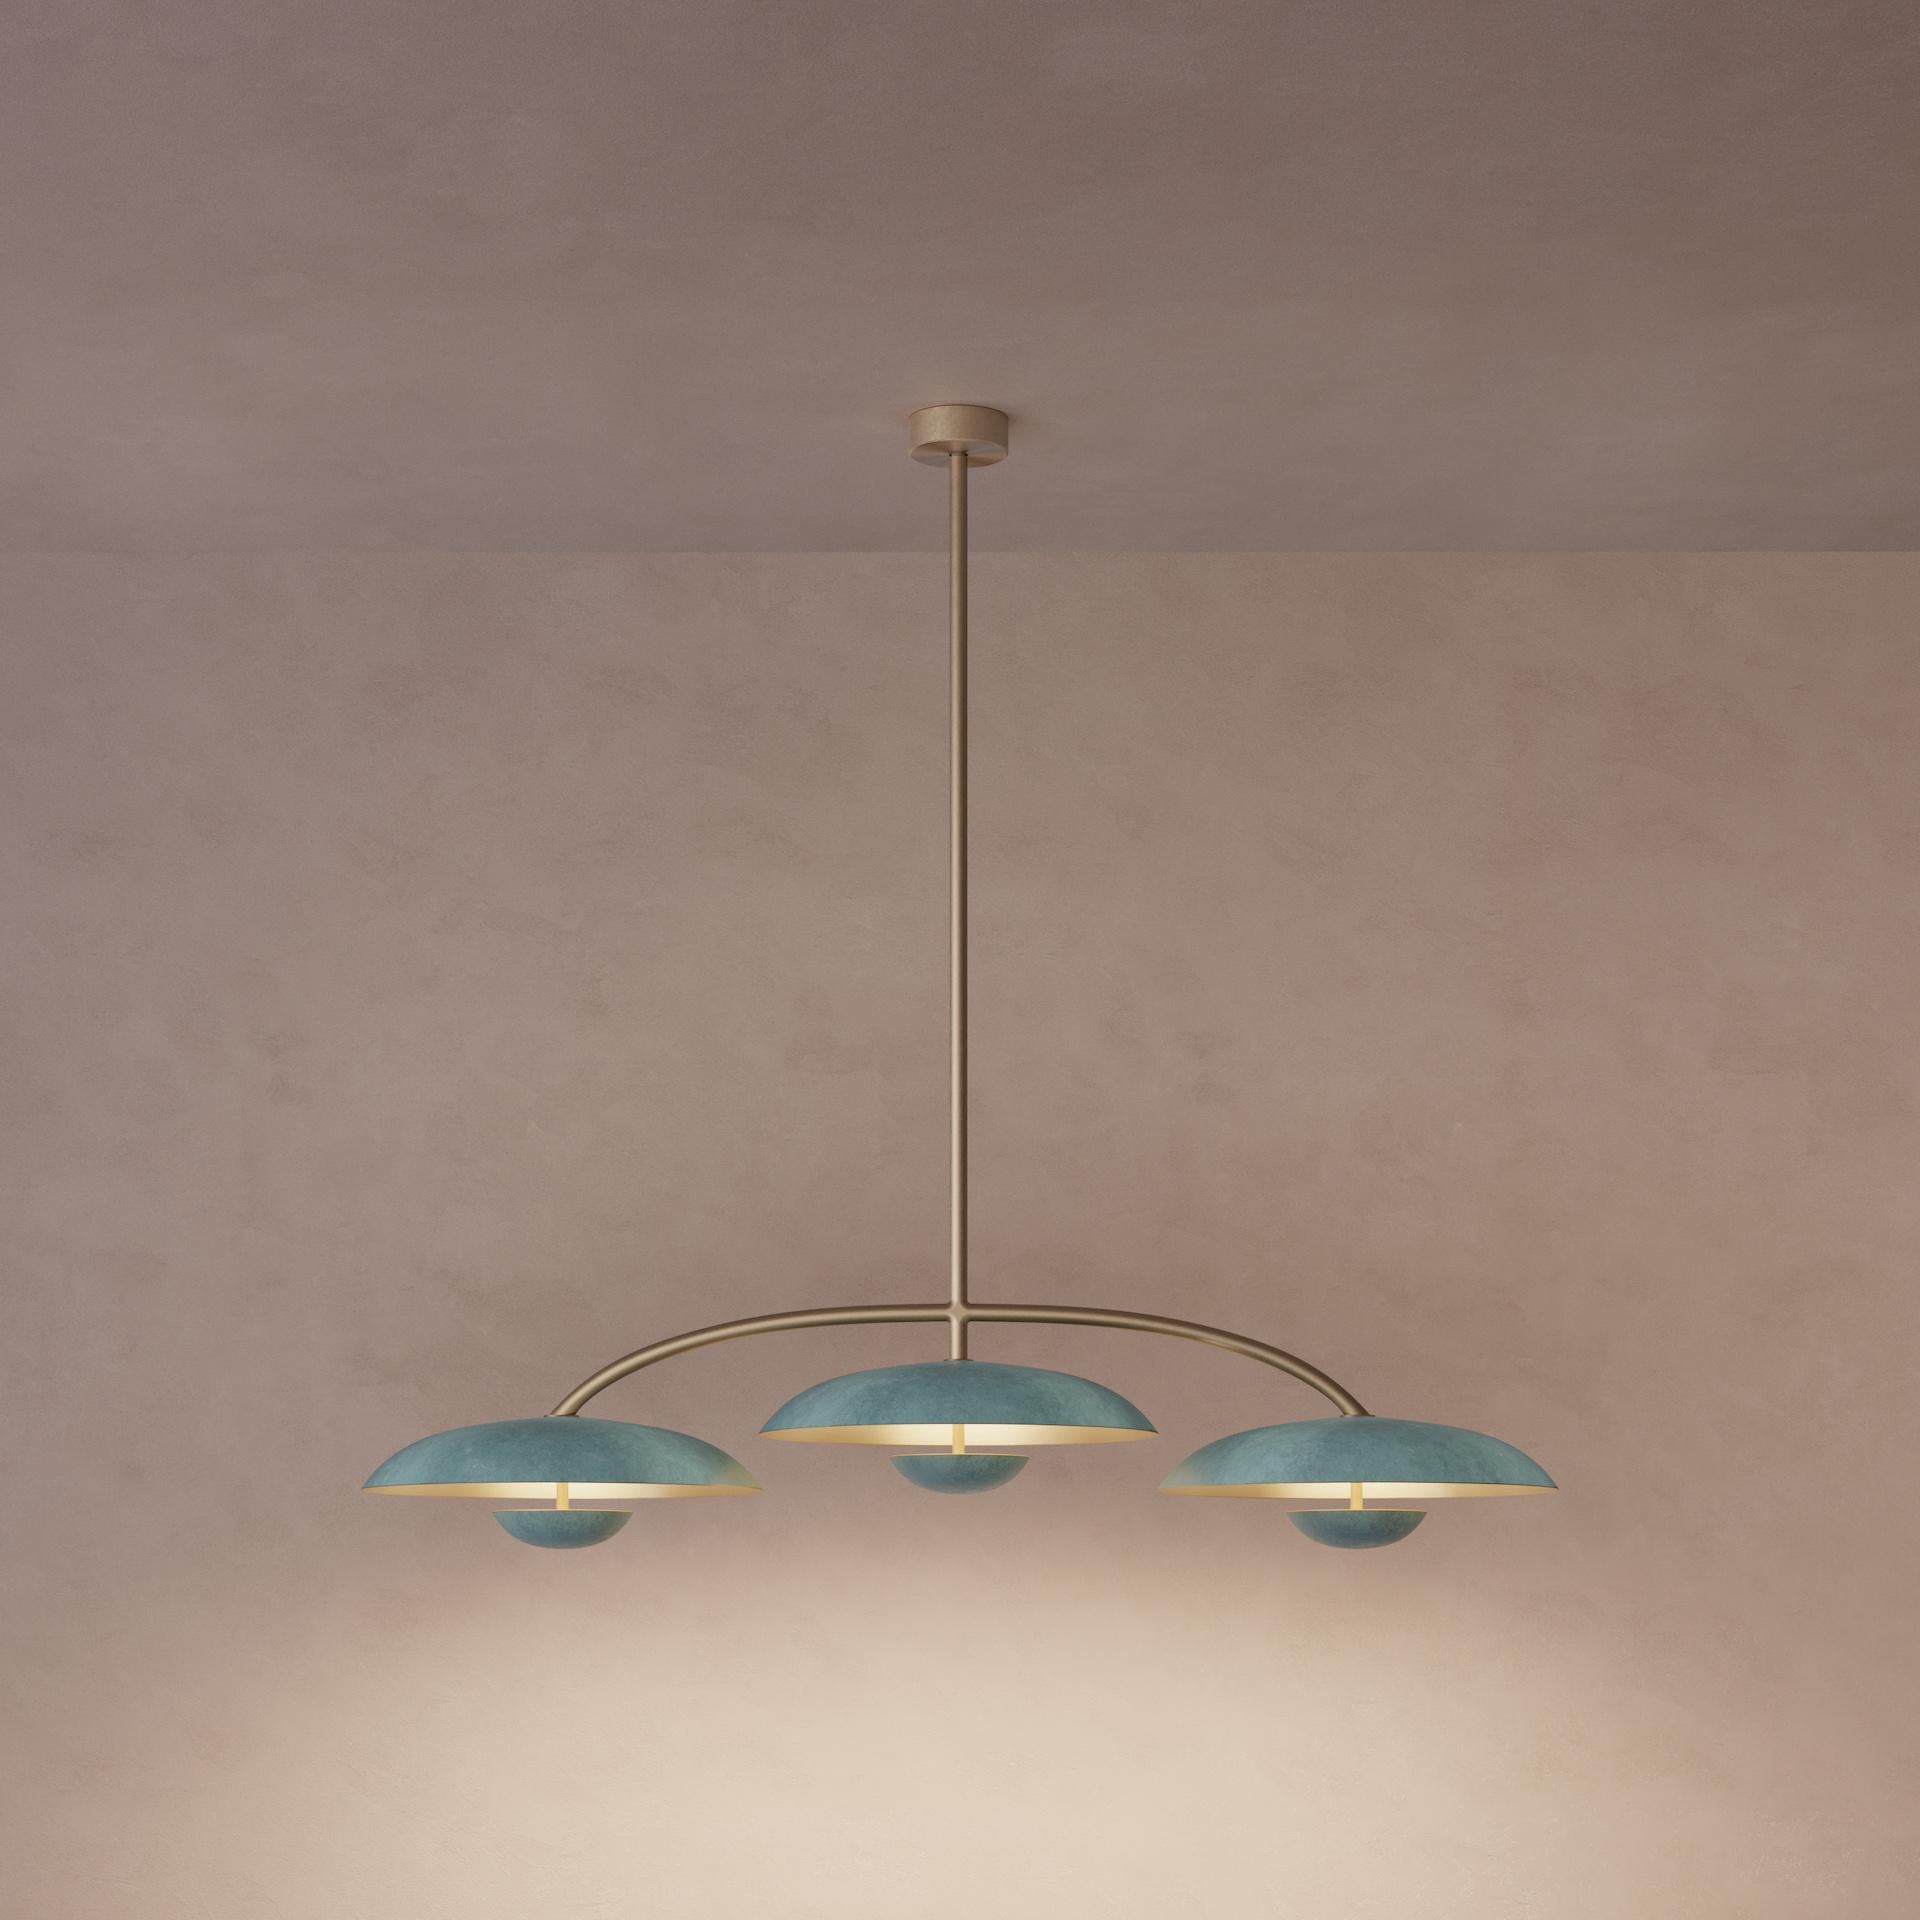 Orbit Trio Verdigris Ceiling Light by Atelier001
Dimensions: D40 x W120 x H116 cm
Materials: shade Verdigris patinated brass
Framework medium bronze
Also available: In different finishes. 

All our lamps can be wired according to each country. If